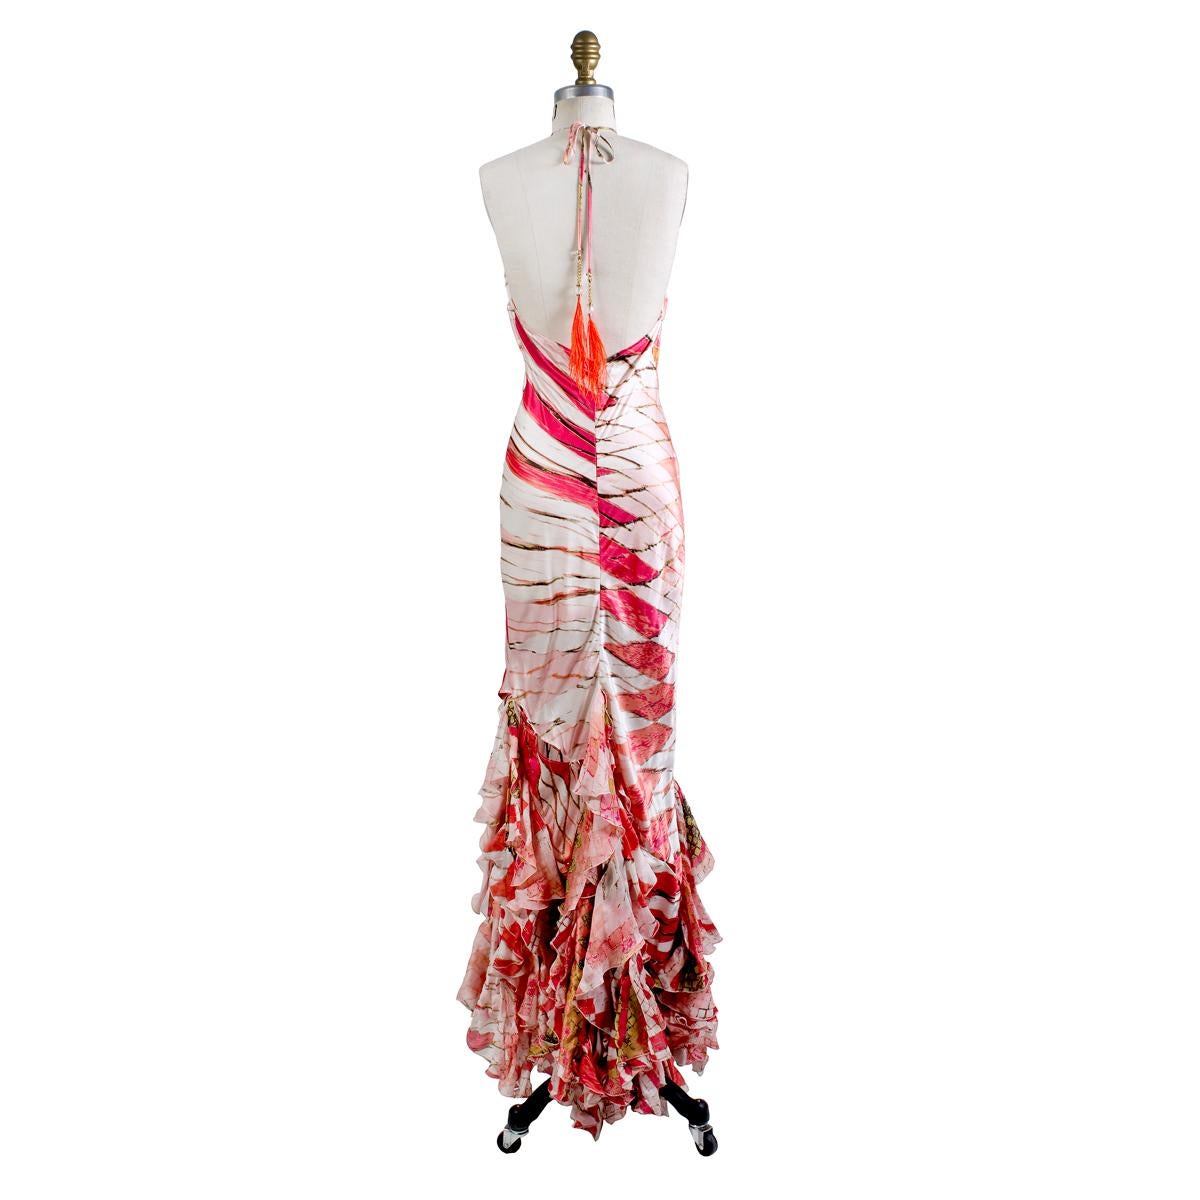 Gown by Roberto Cavalli for the S/S 2004-2005 collection
Halter neckline 
Reptilian effect pattern in coral tones
Asymmetrical ruffles along bottom
Silk with tiny gold metallic accents
Condition: Excellent
Size/Measurements:
Size small
30